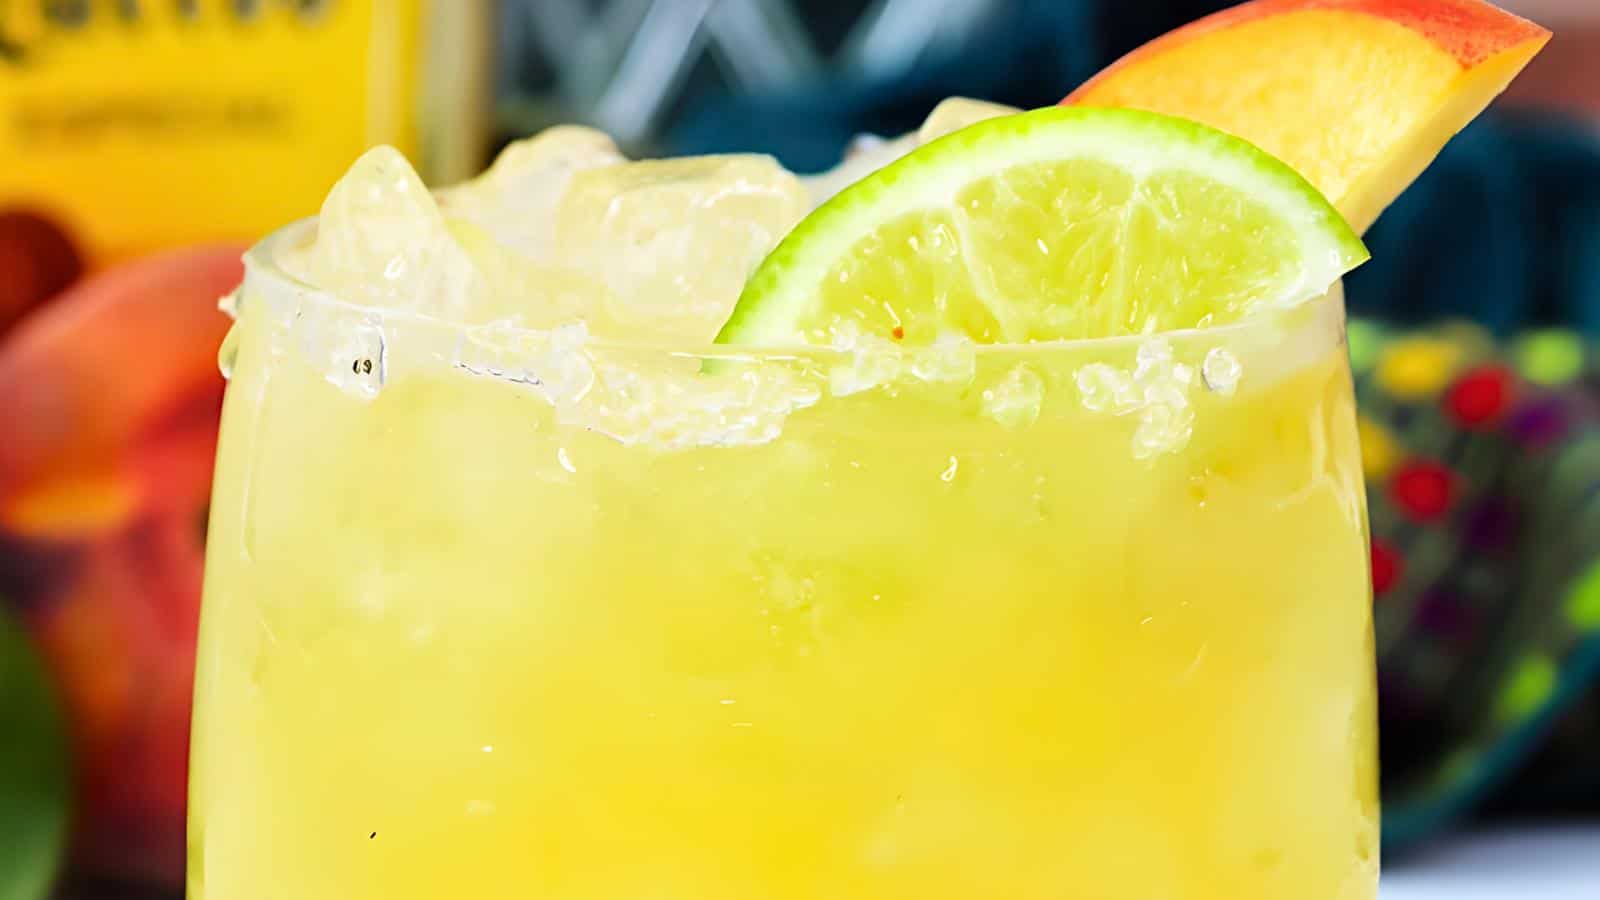 <p>This Peach Margarita is summer in a glass. Blending juicy peaches with tangy lime and tequila, it’s a sweet and tangy cocktail. Add a salted rim for that classic margarita touch!<br><strong>Get the Recipe: </strong><a href="https://www.ohmy-creative.com/recipe/peach-margarita-recipe/?utm_source=msn&utm_medium=page&utm_campaign=msn" rel="noopener">Peach Margarita Recipe</a></p>